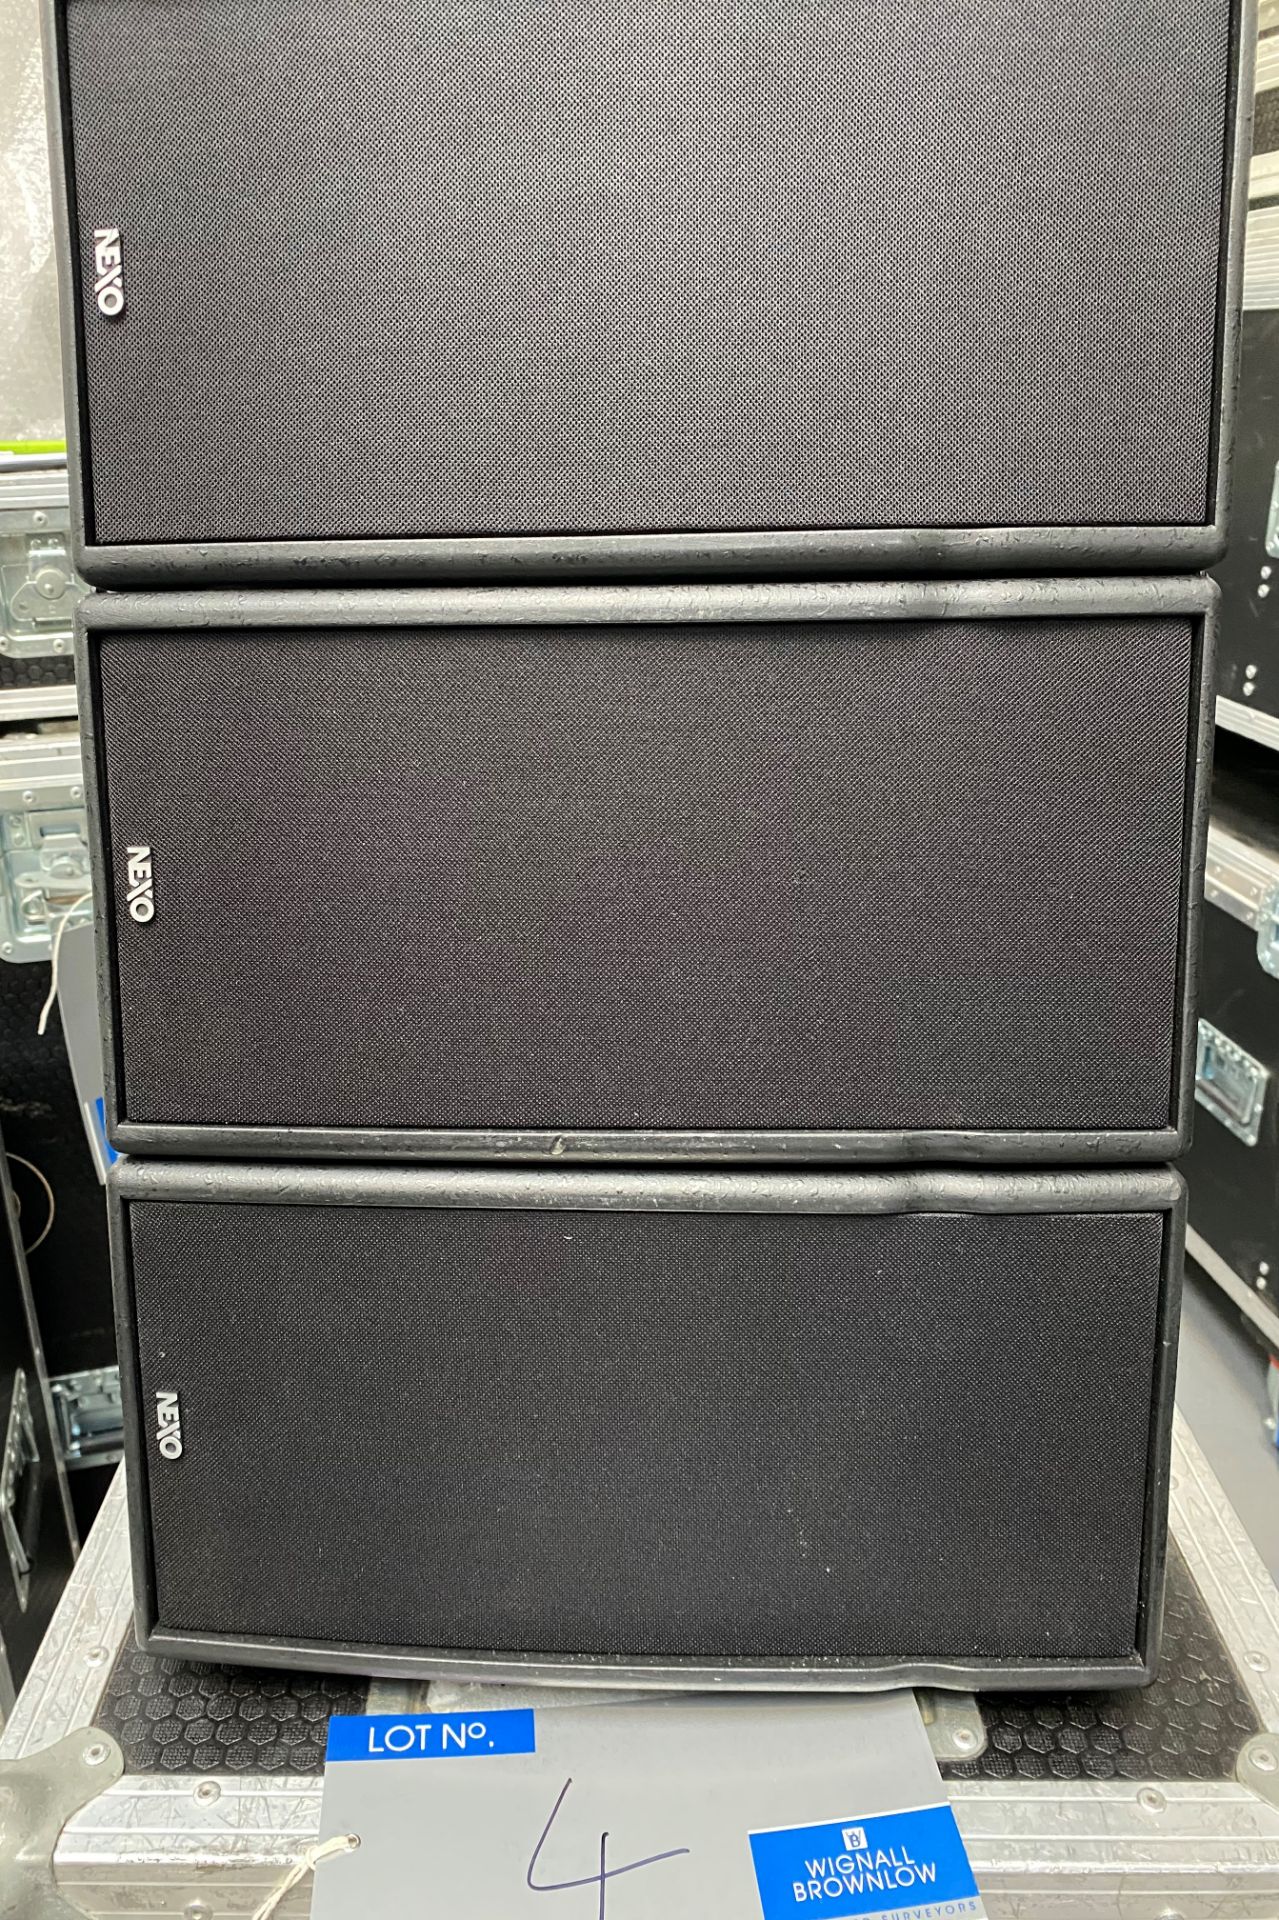 3 NEXO Geo M620 Compact Line Array Speakers with mobile flight case (in working order).